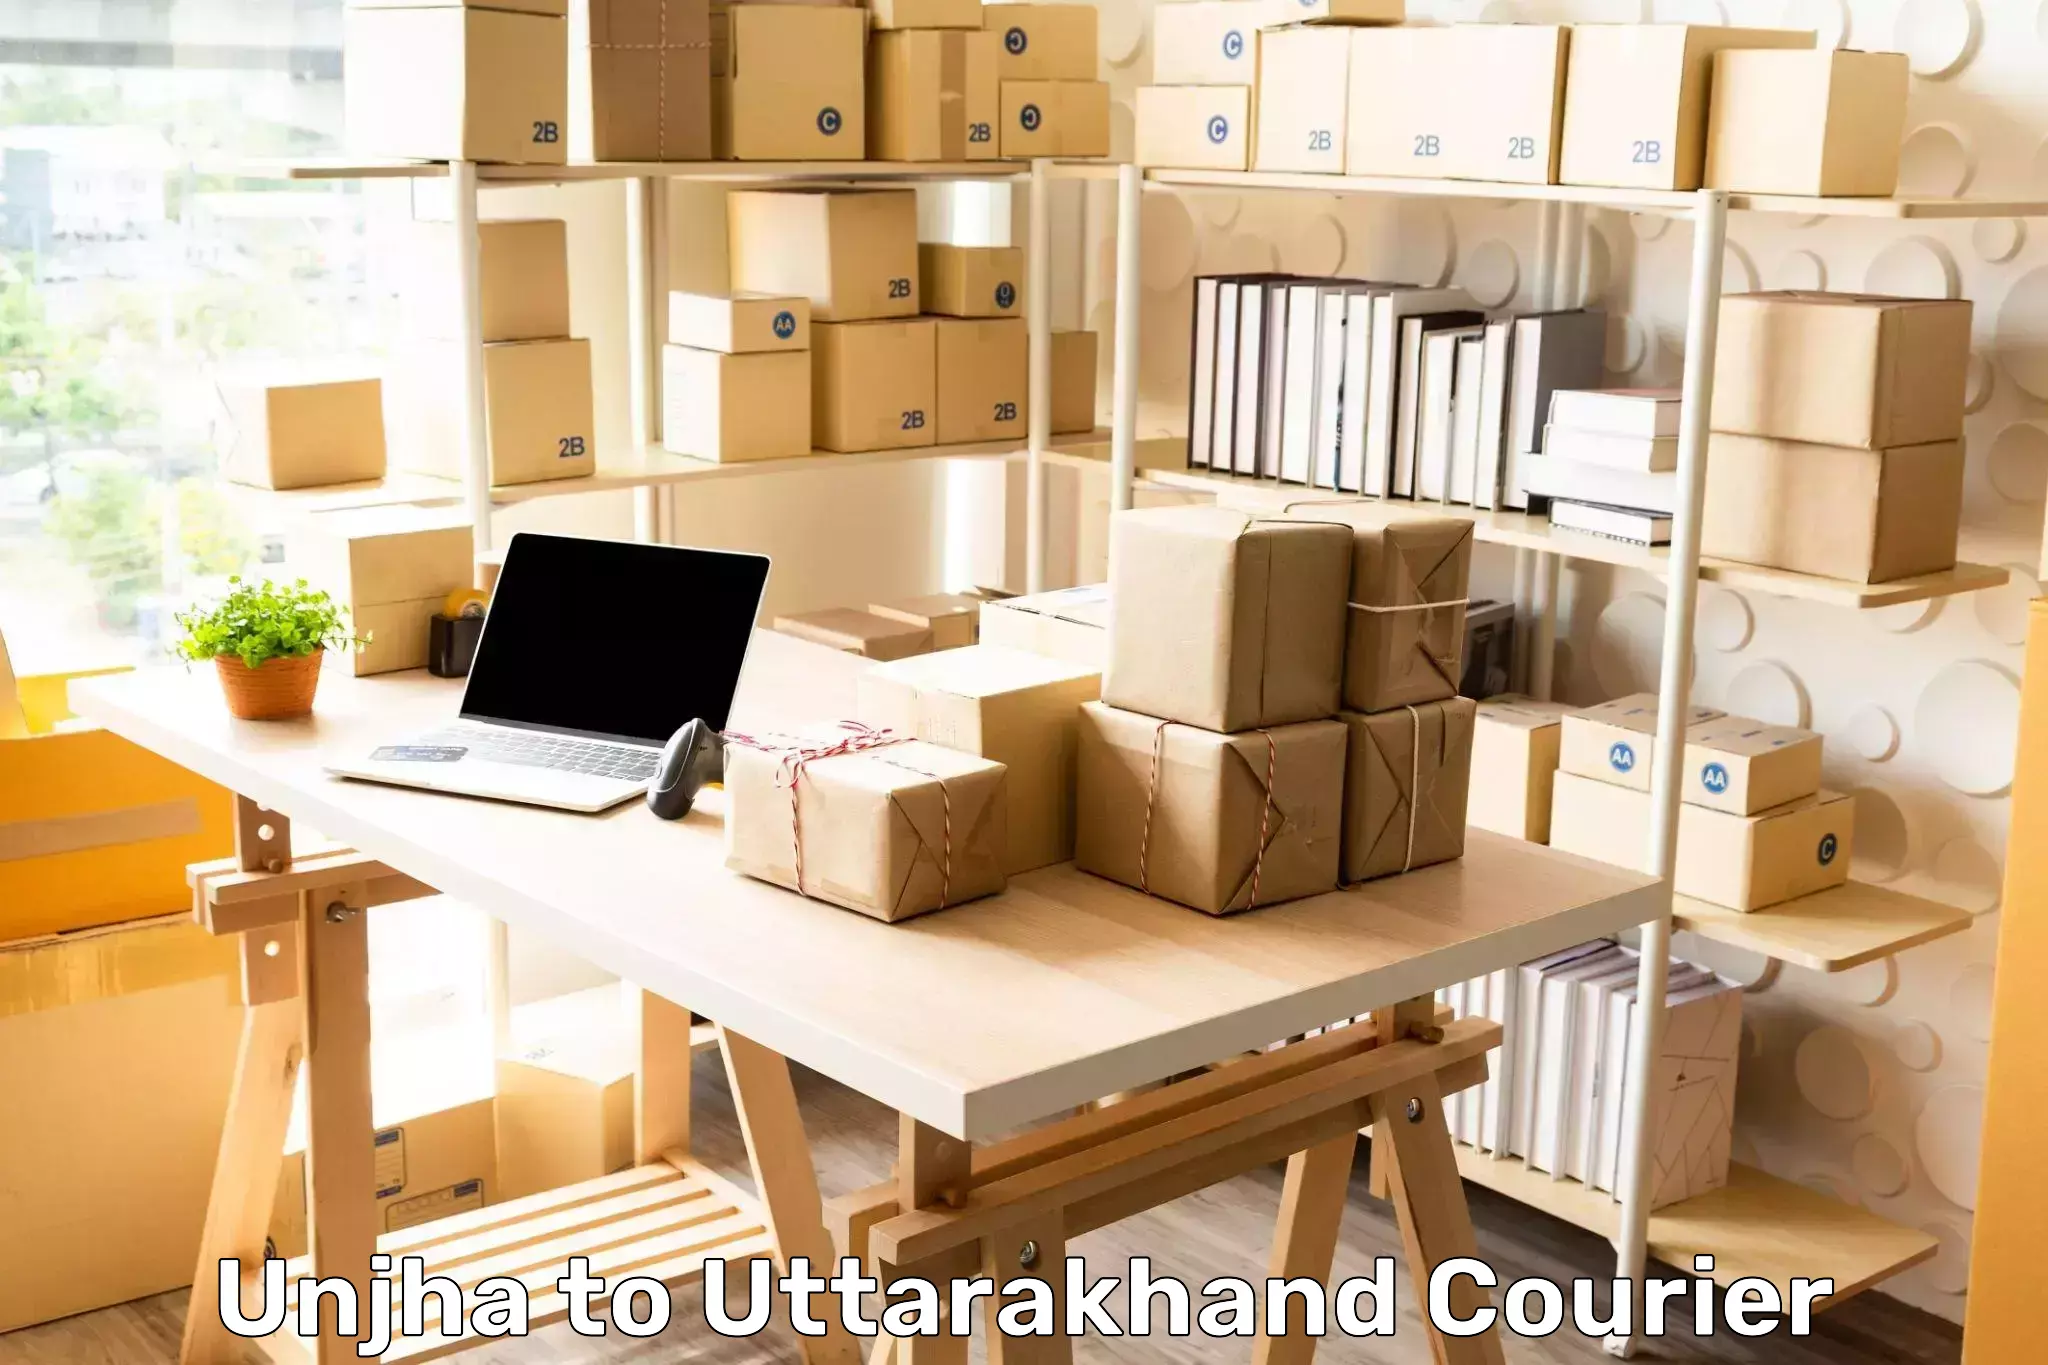 On-call courier service Unjha to Haridwar